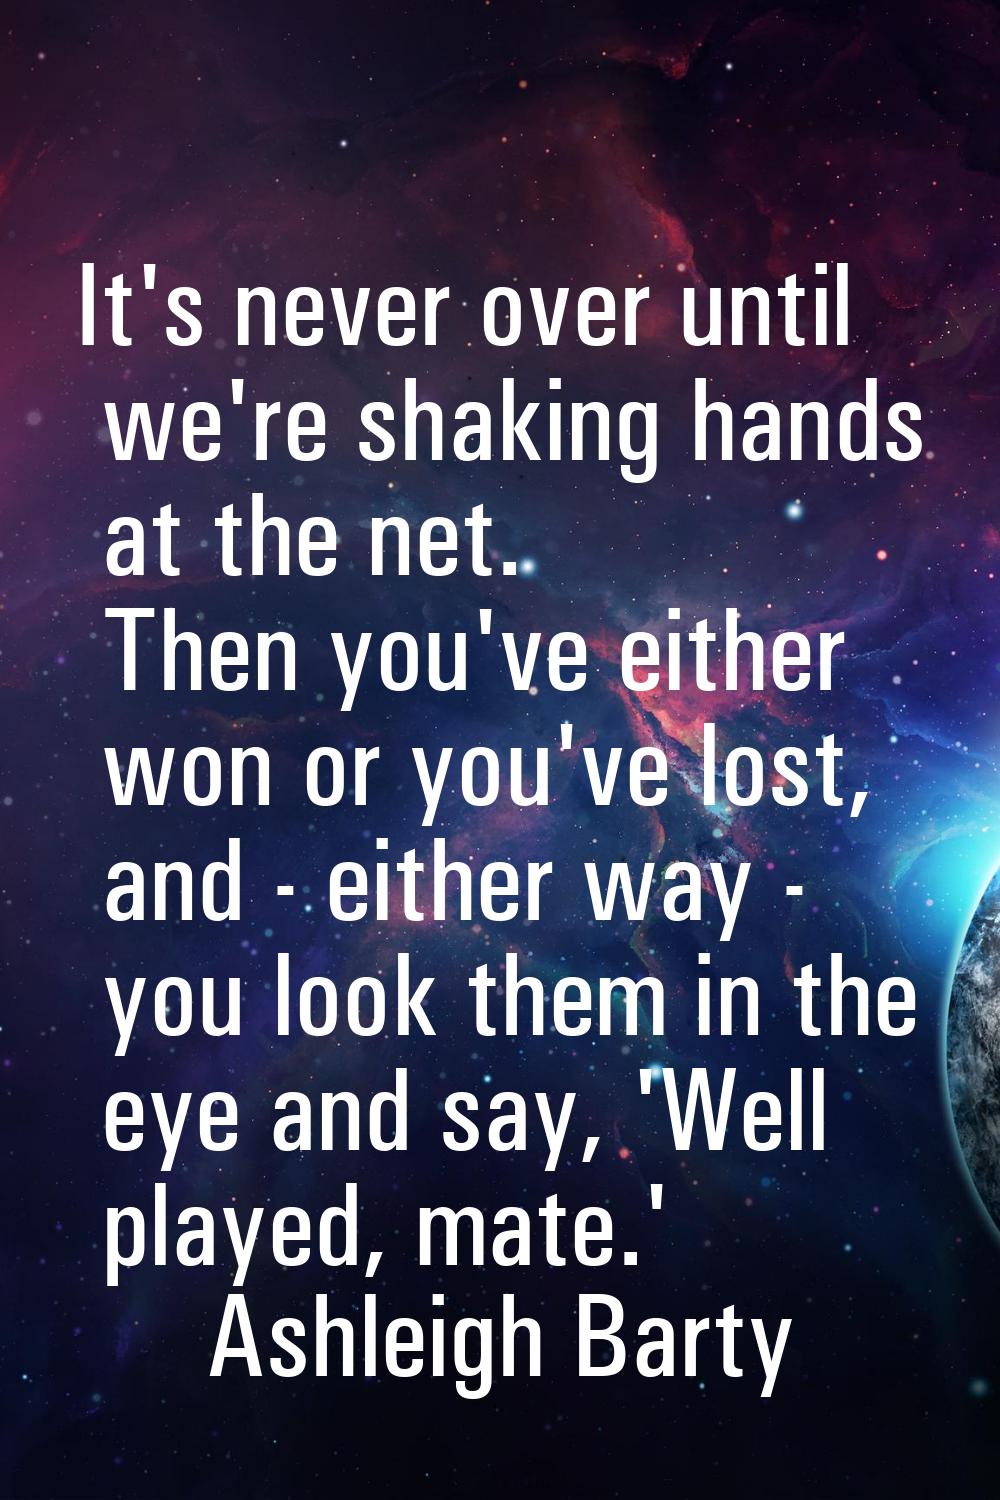 It's never over until we're shaking hands at the net. Then you've either won or you've lost, and - 